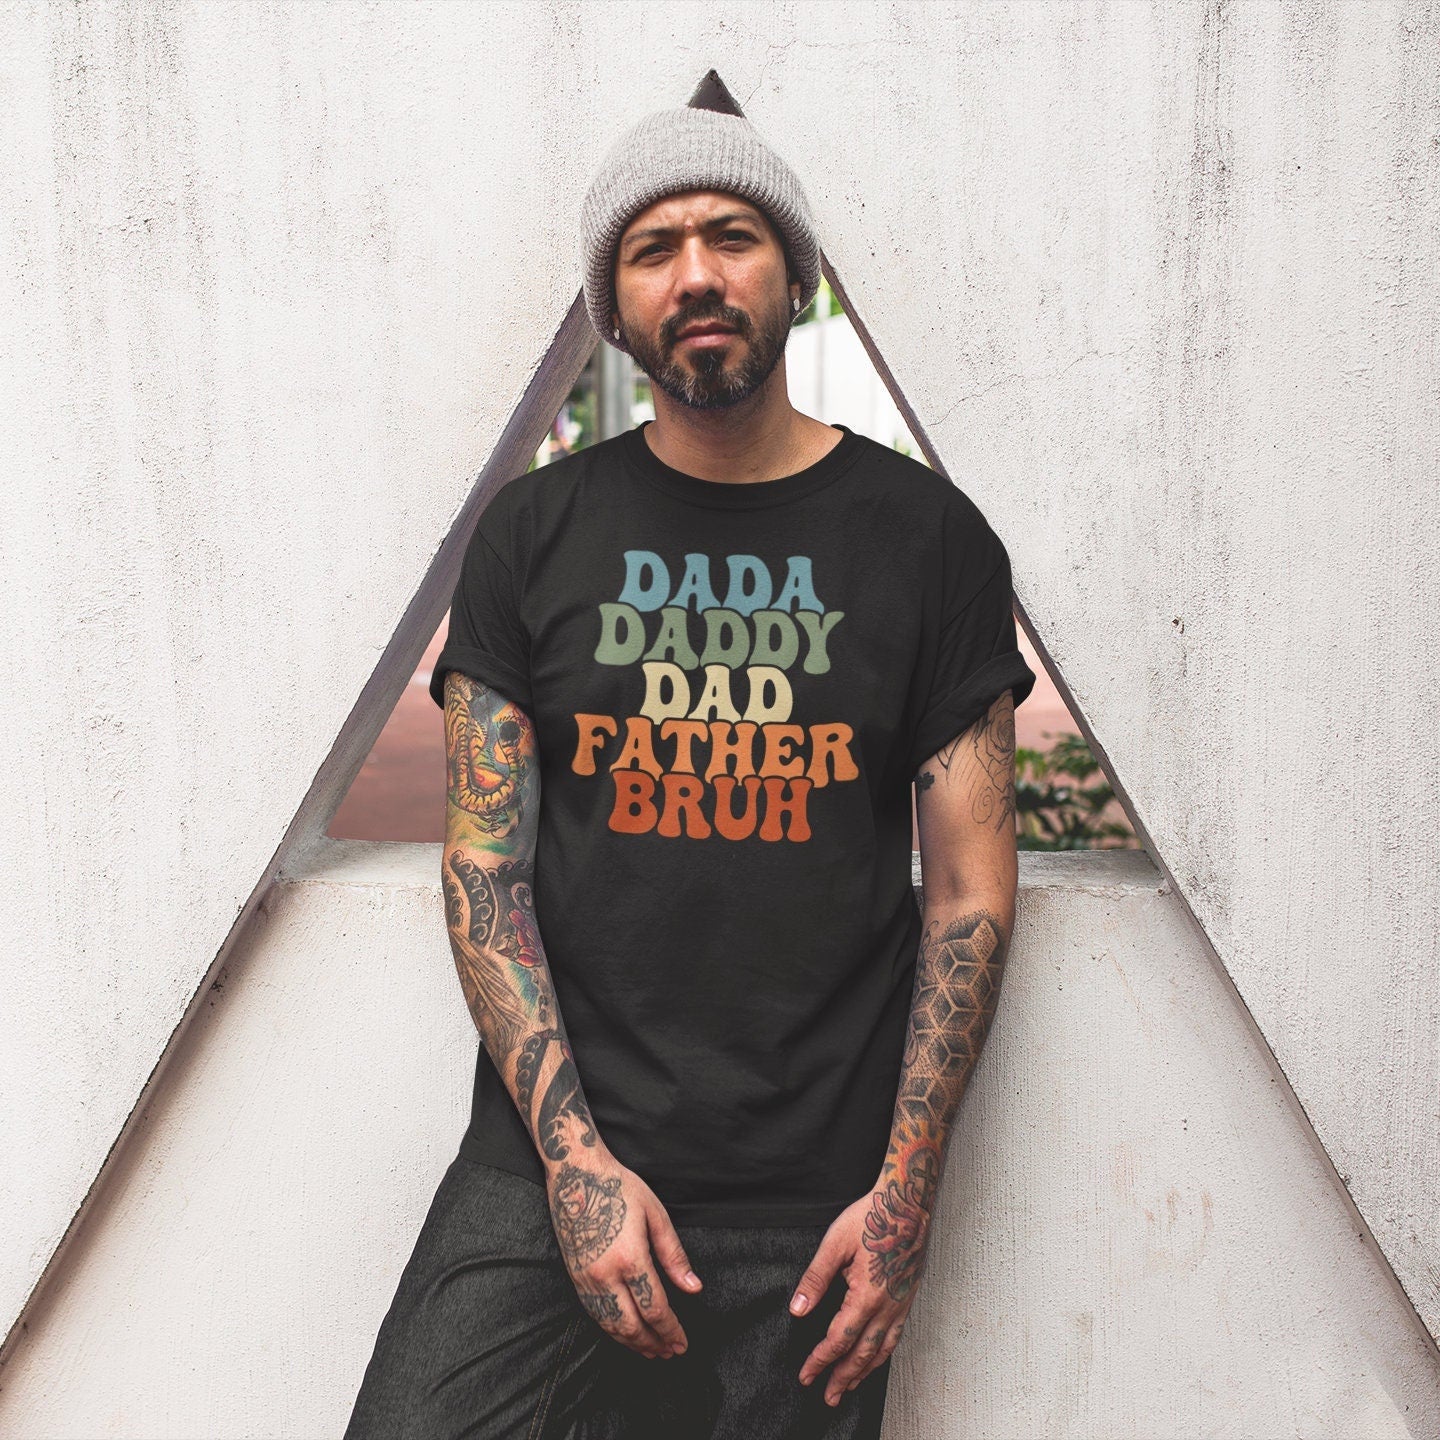 Fathers Day t Shirt, Dada Daddy Father Bruh t-shirt, Fathers Day Gifts For Dad,  Shirts for Dad, Funny Shirt Men, Gift for Dad